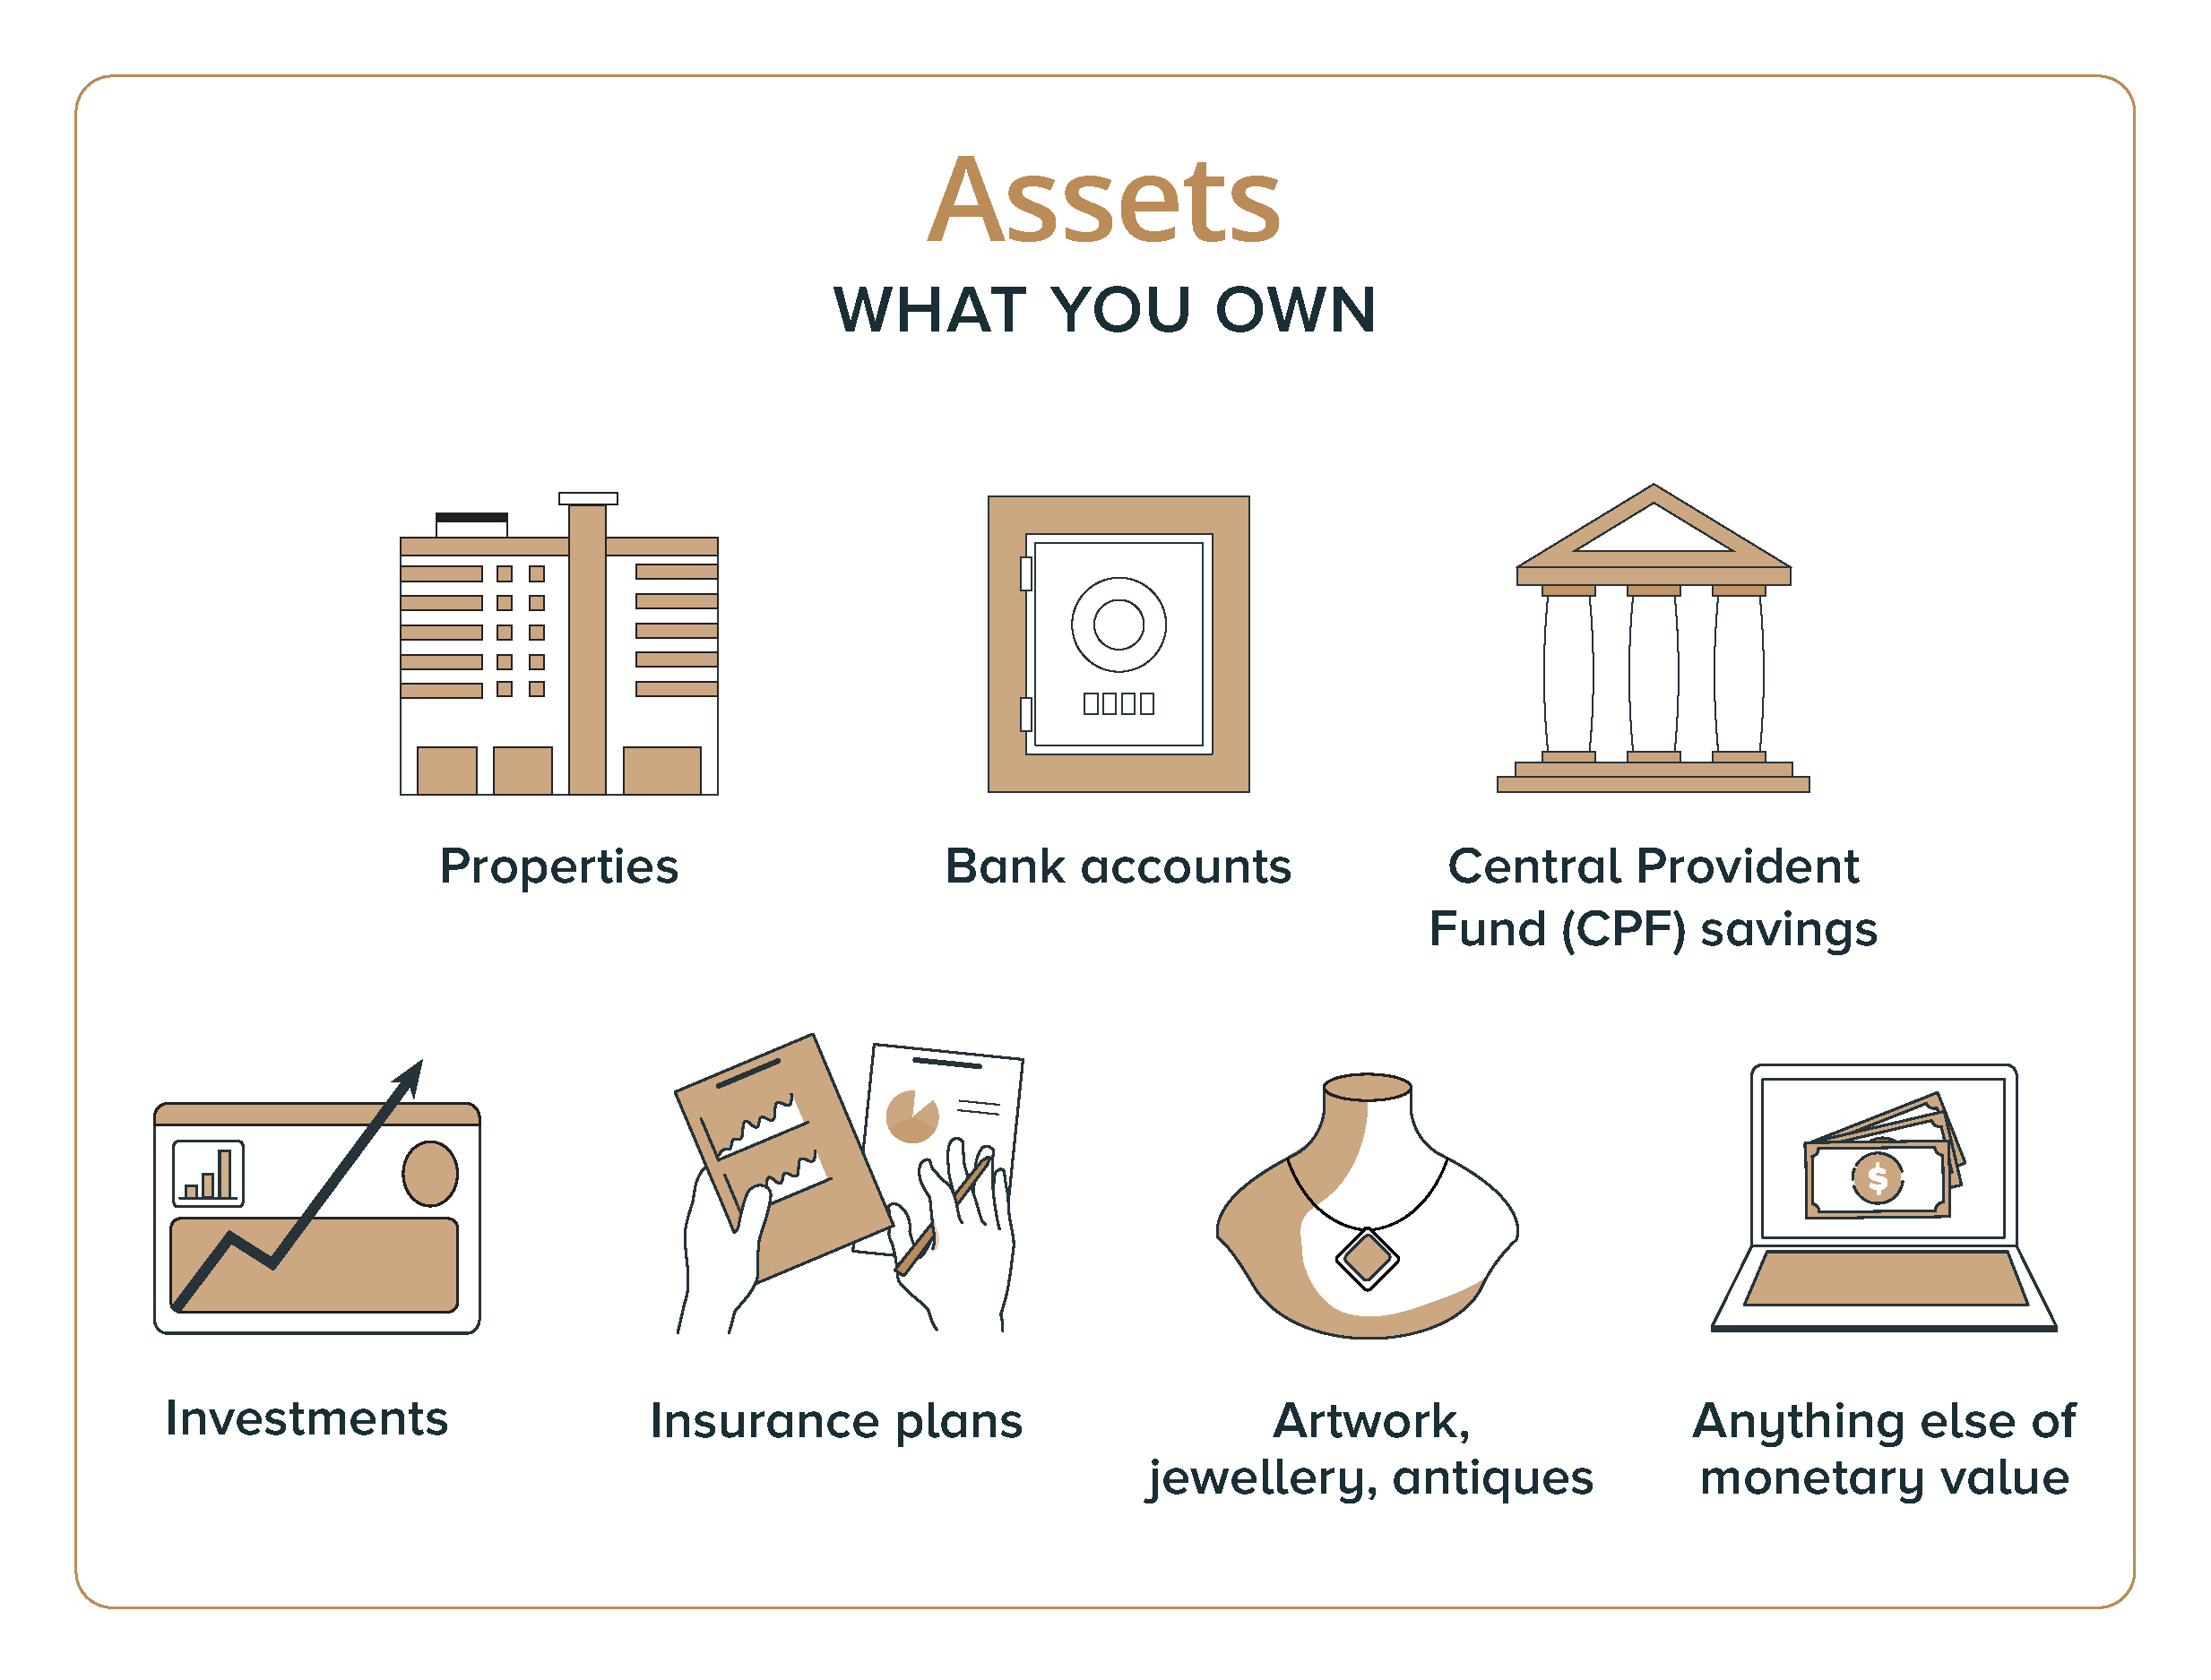 What are assets? Assets are the things you own.